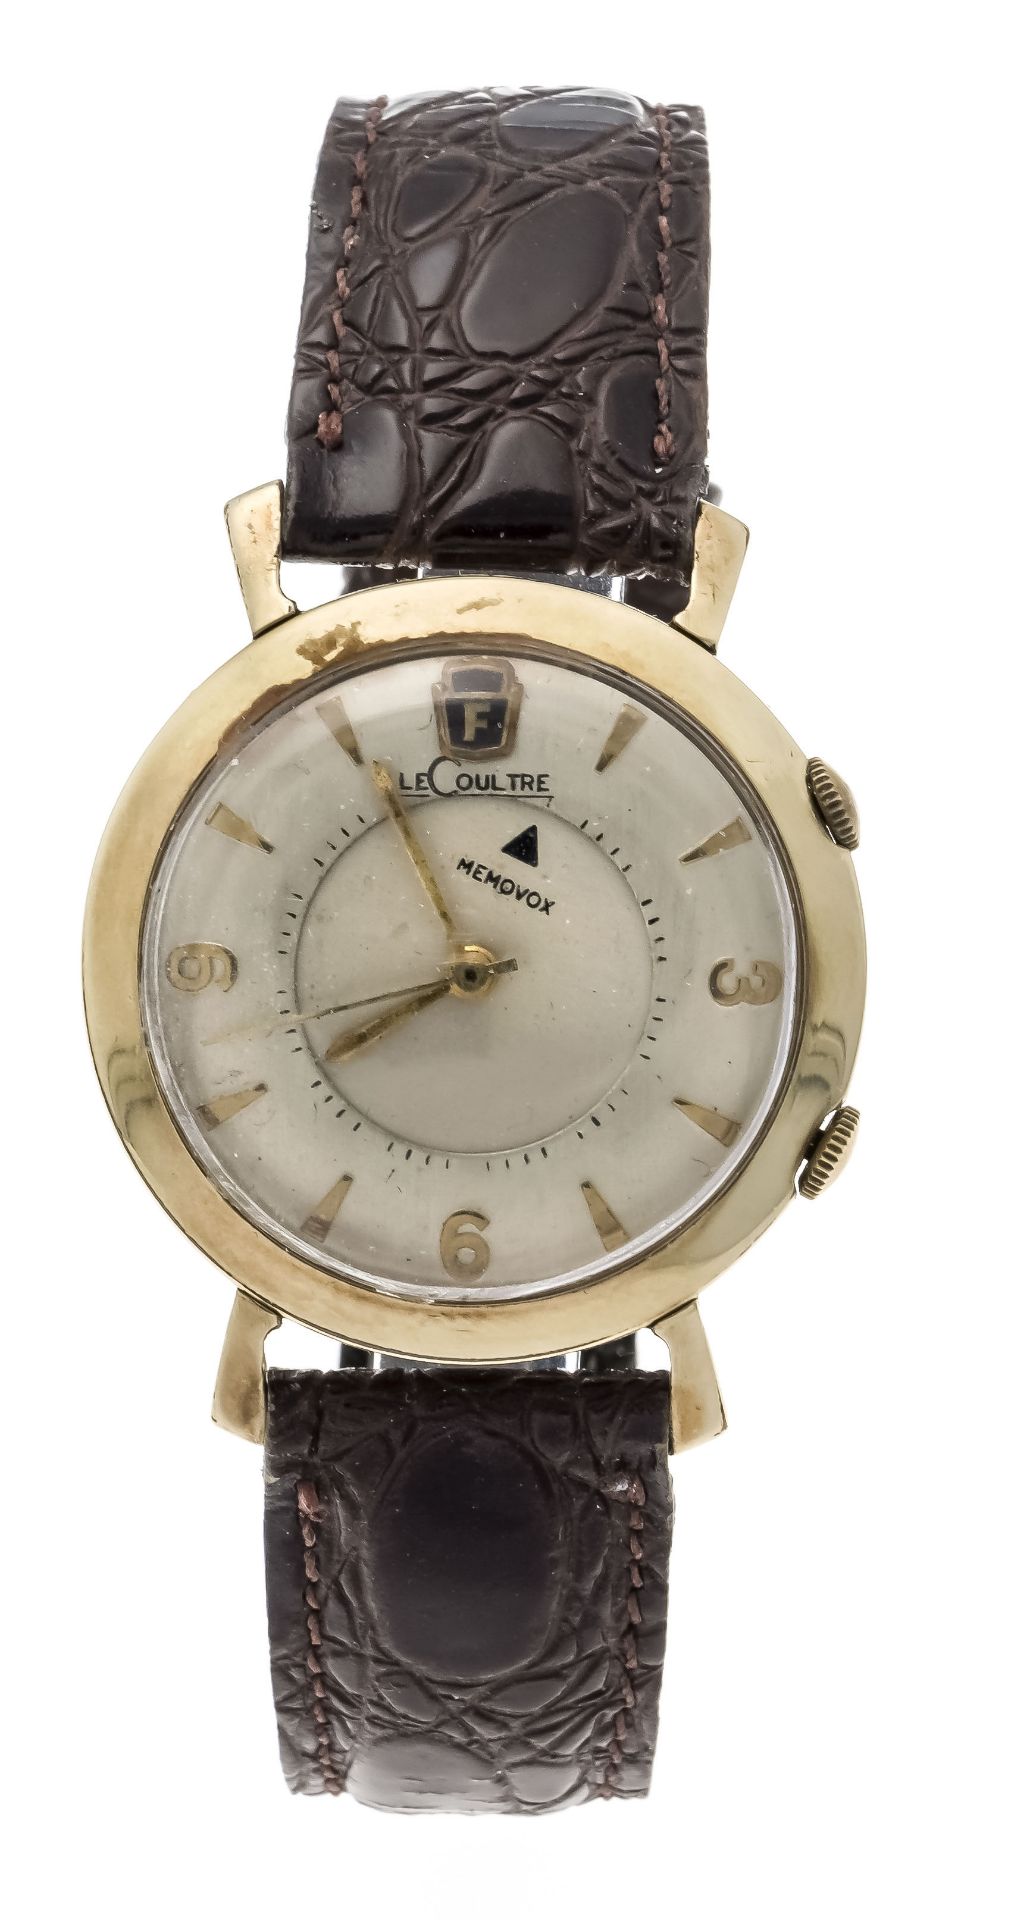 LeCoultre Memovox Alarm men's watch, rare !!! Henry Ford version, circa 1955, 10ct. GoldFilled,